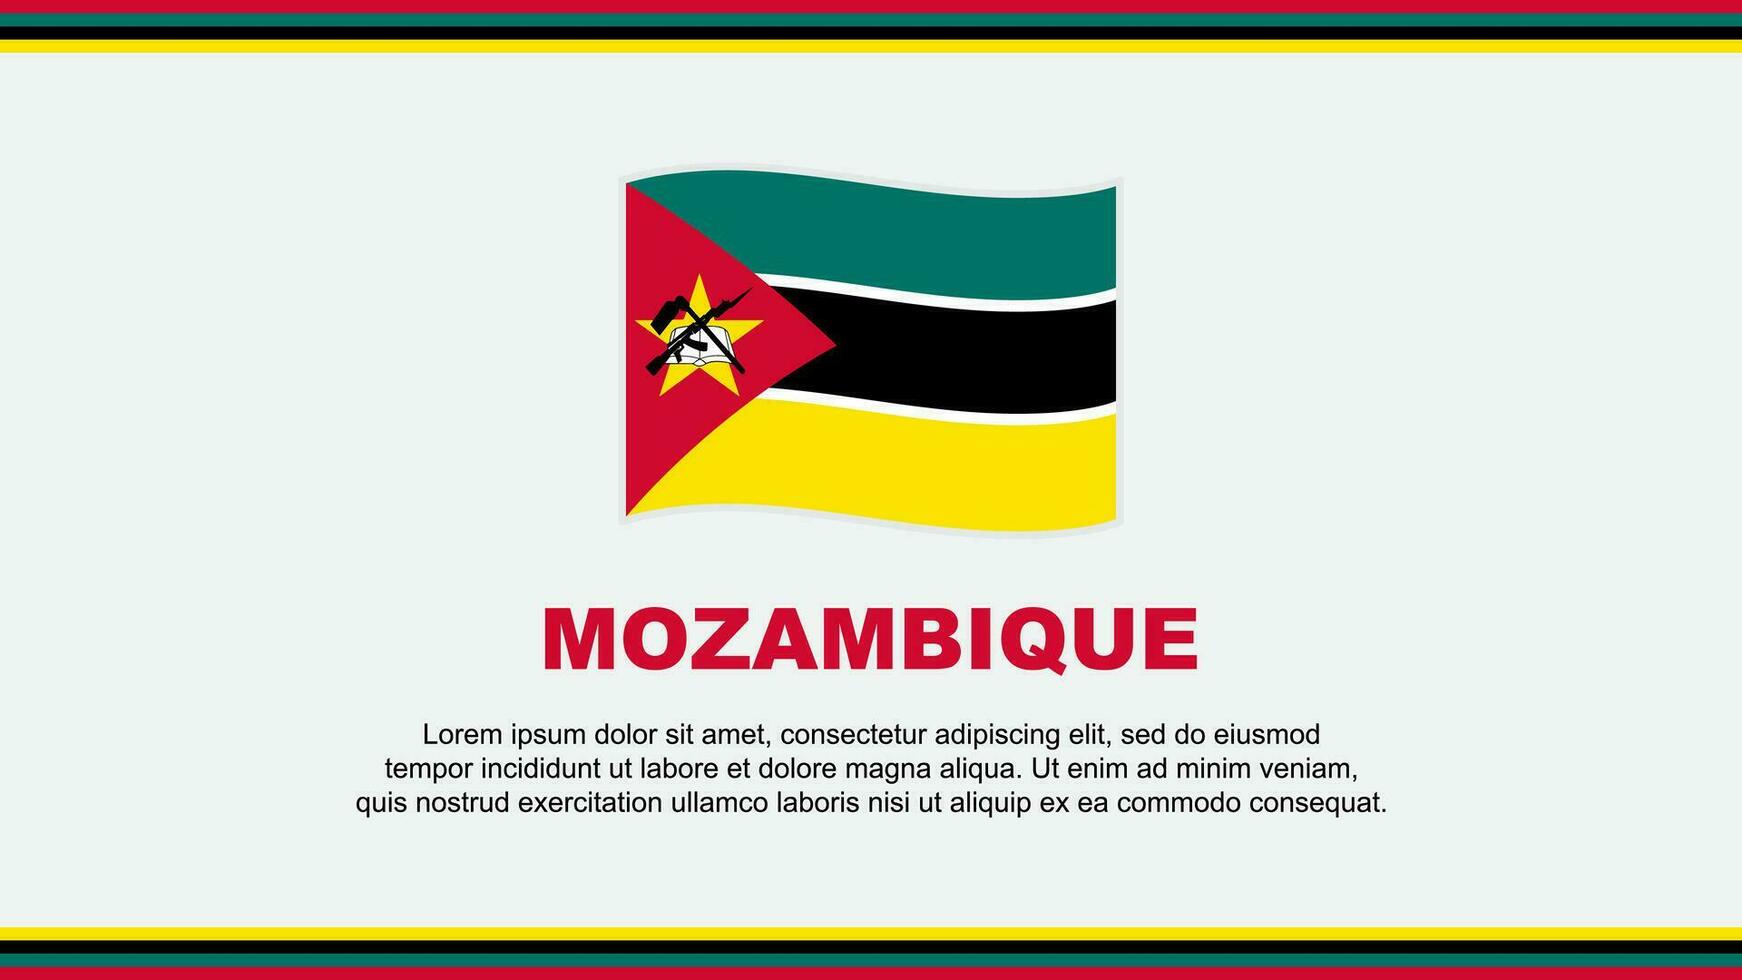 Mozambique Flag Abstract Background Design Template. Mozambique Independence Day Banner Social Media Vector Illustration. Mozambique Design